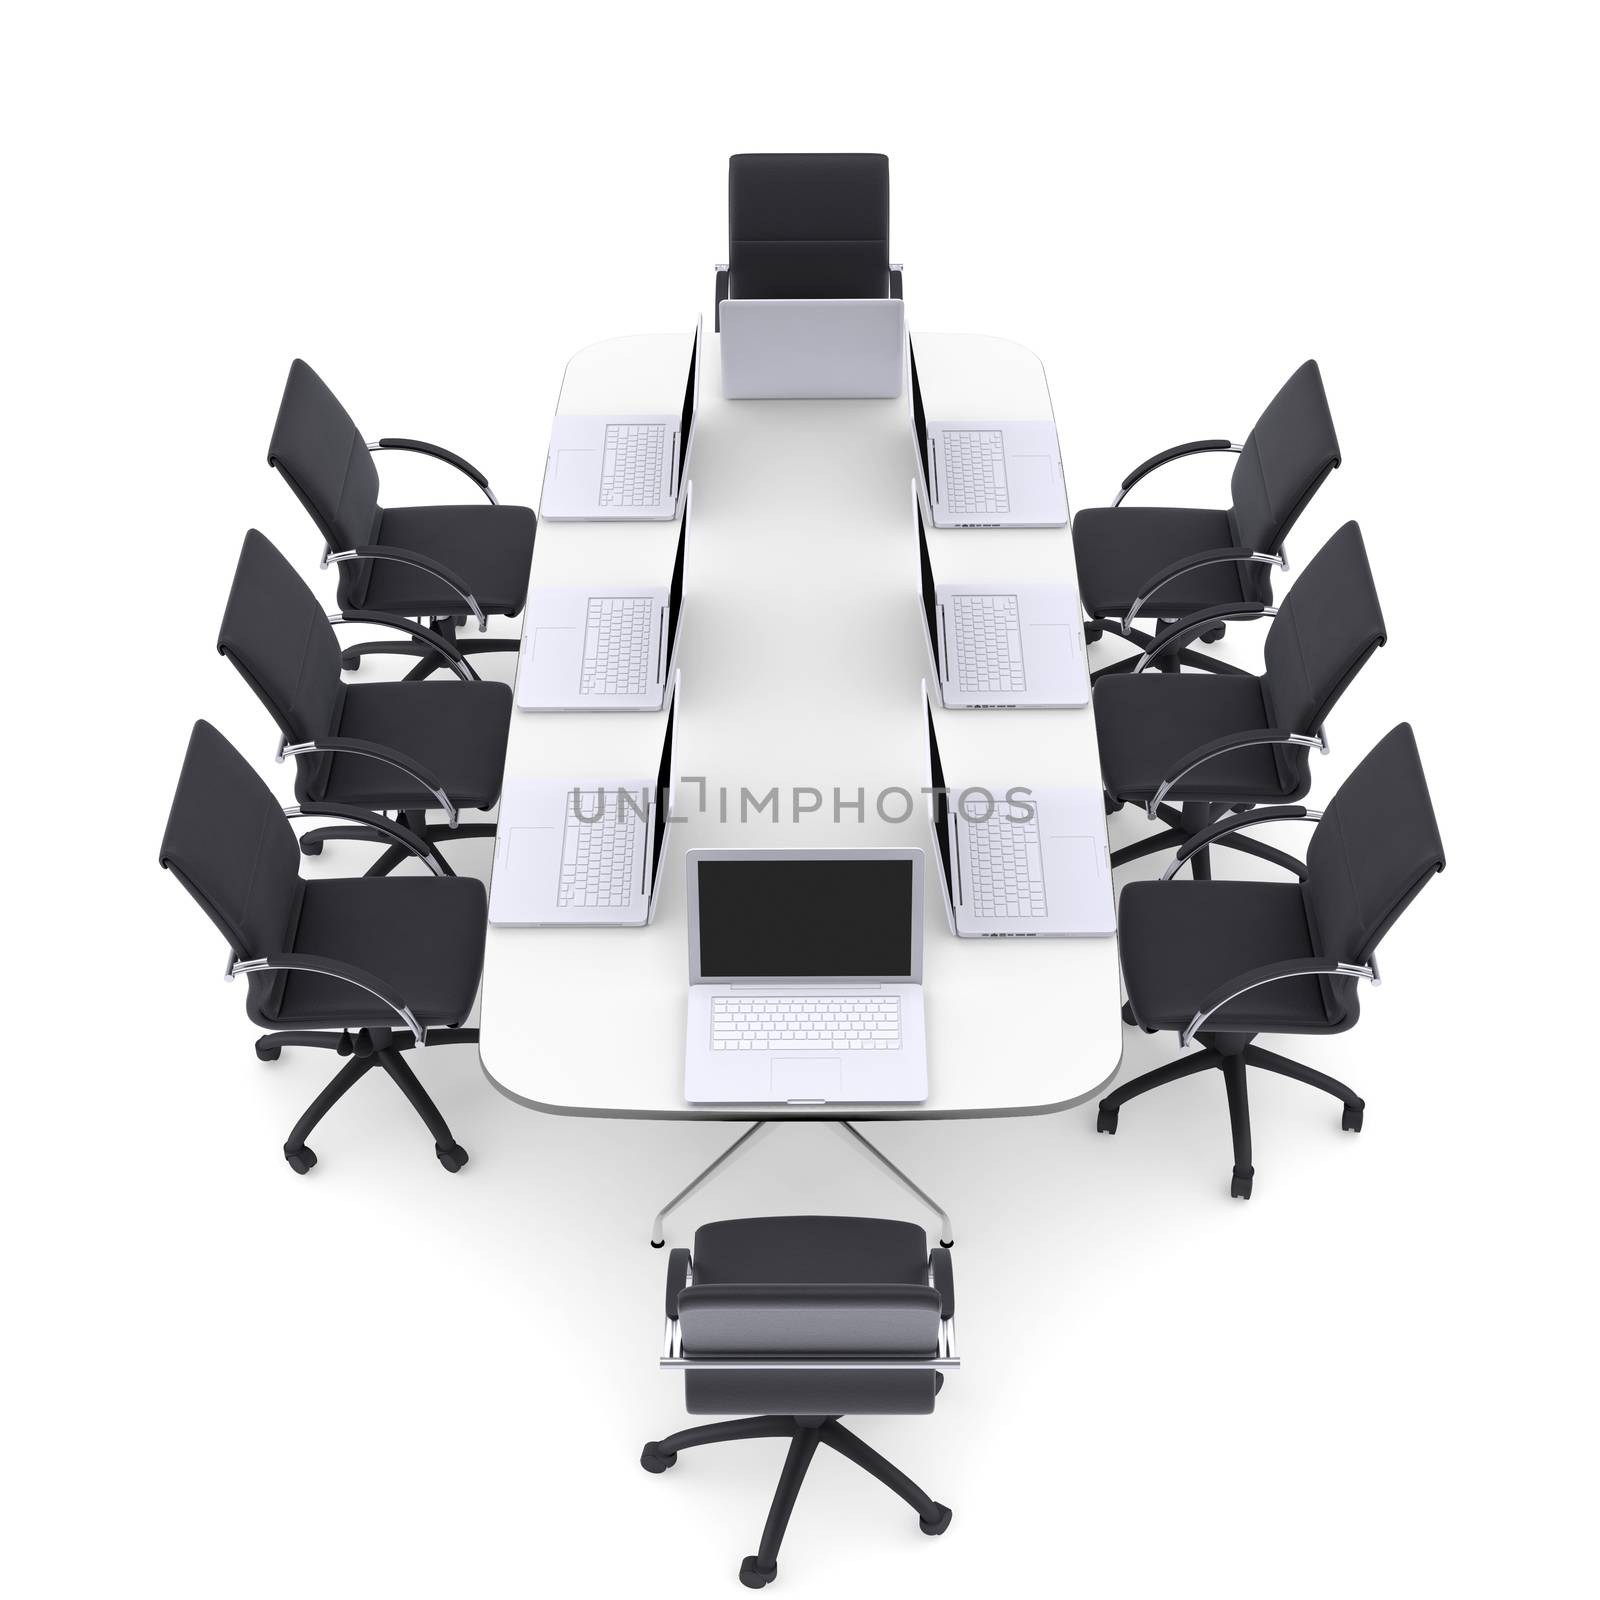 Laptops on the office round table and chairs by cherezoff